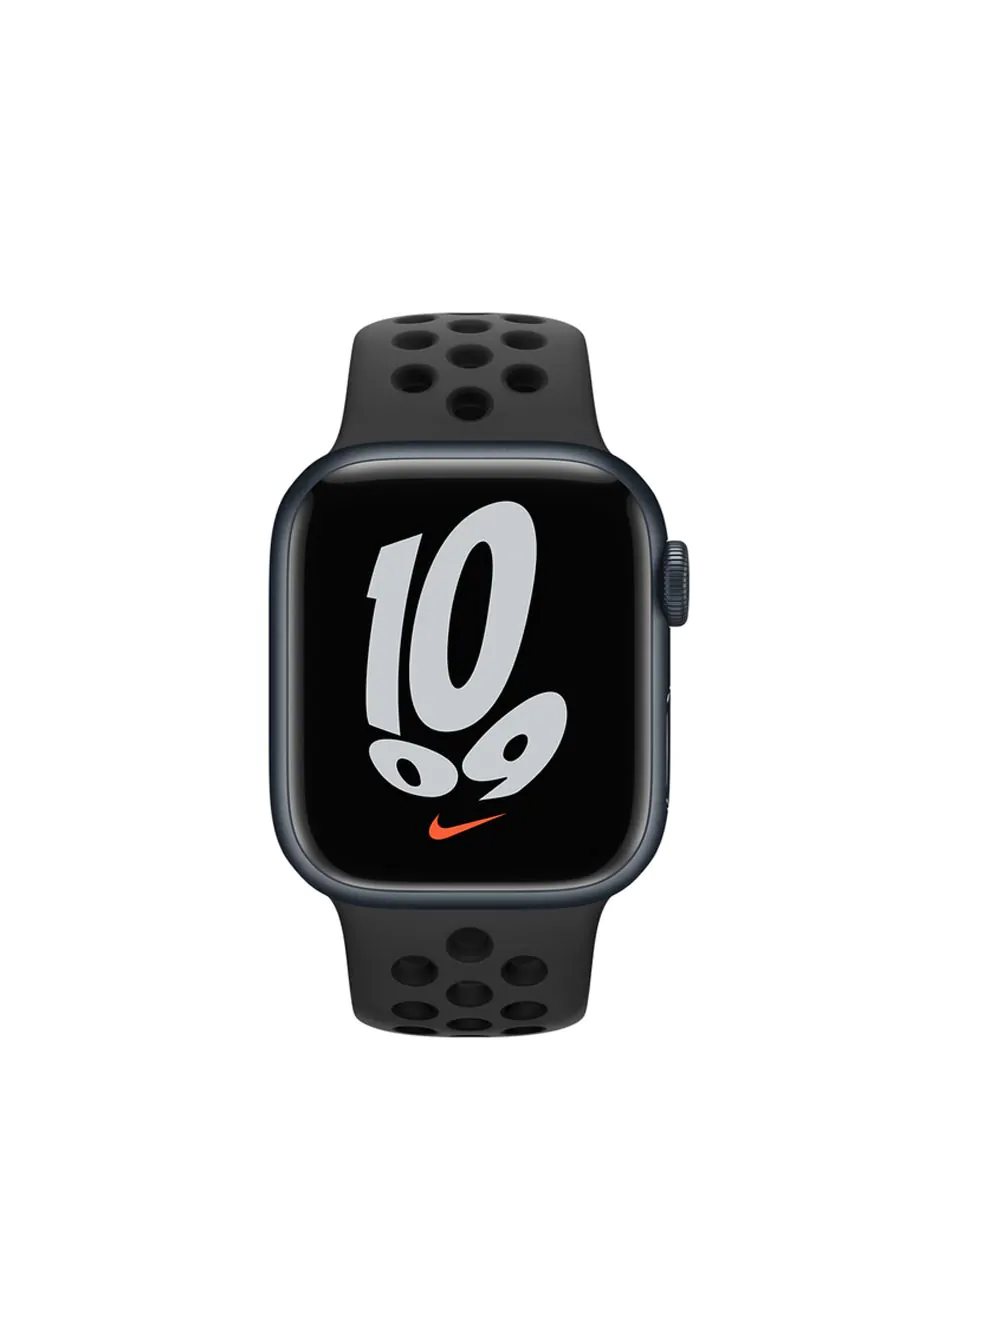 Apple Watch Series 7 Nike review: sporty spice | T3